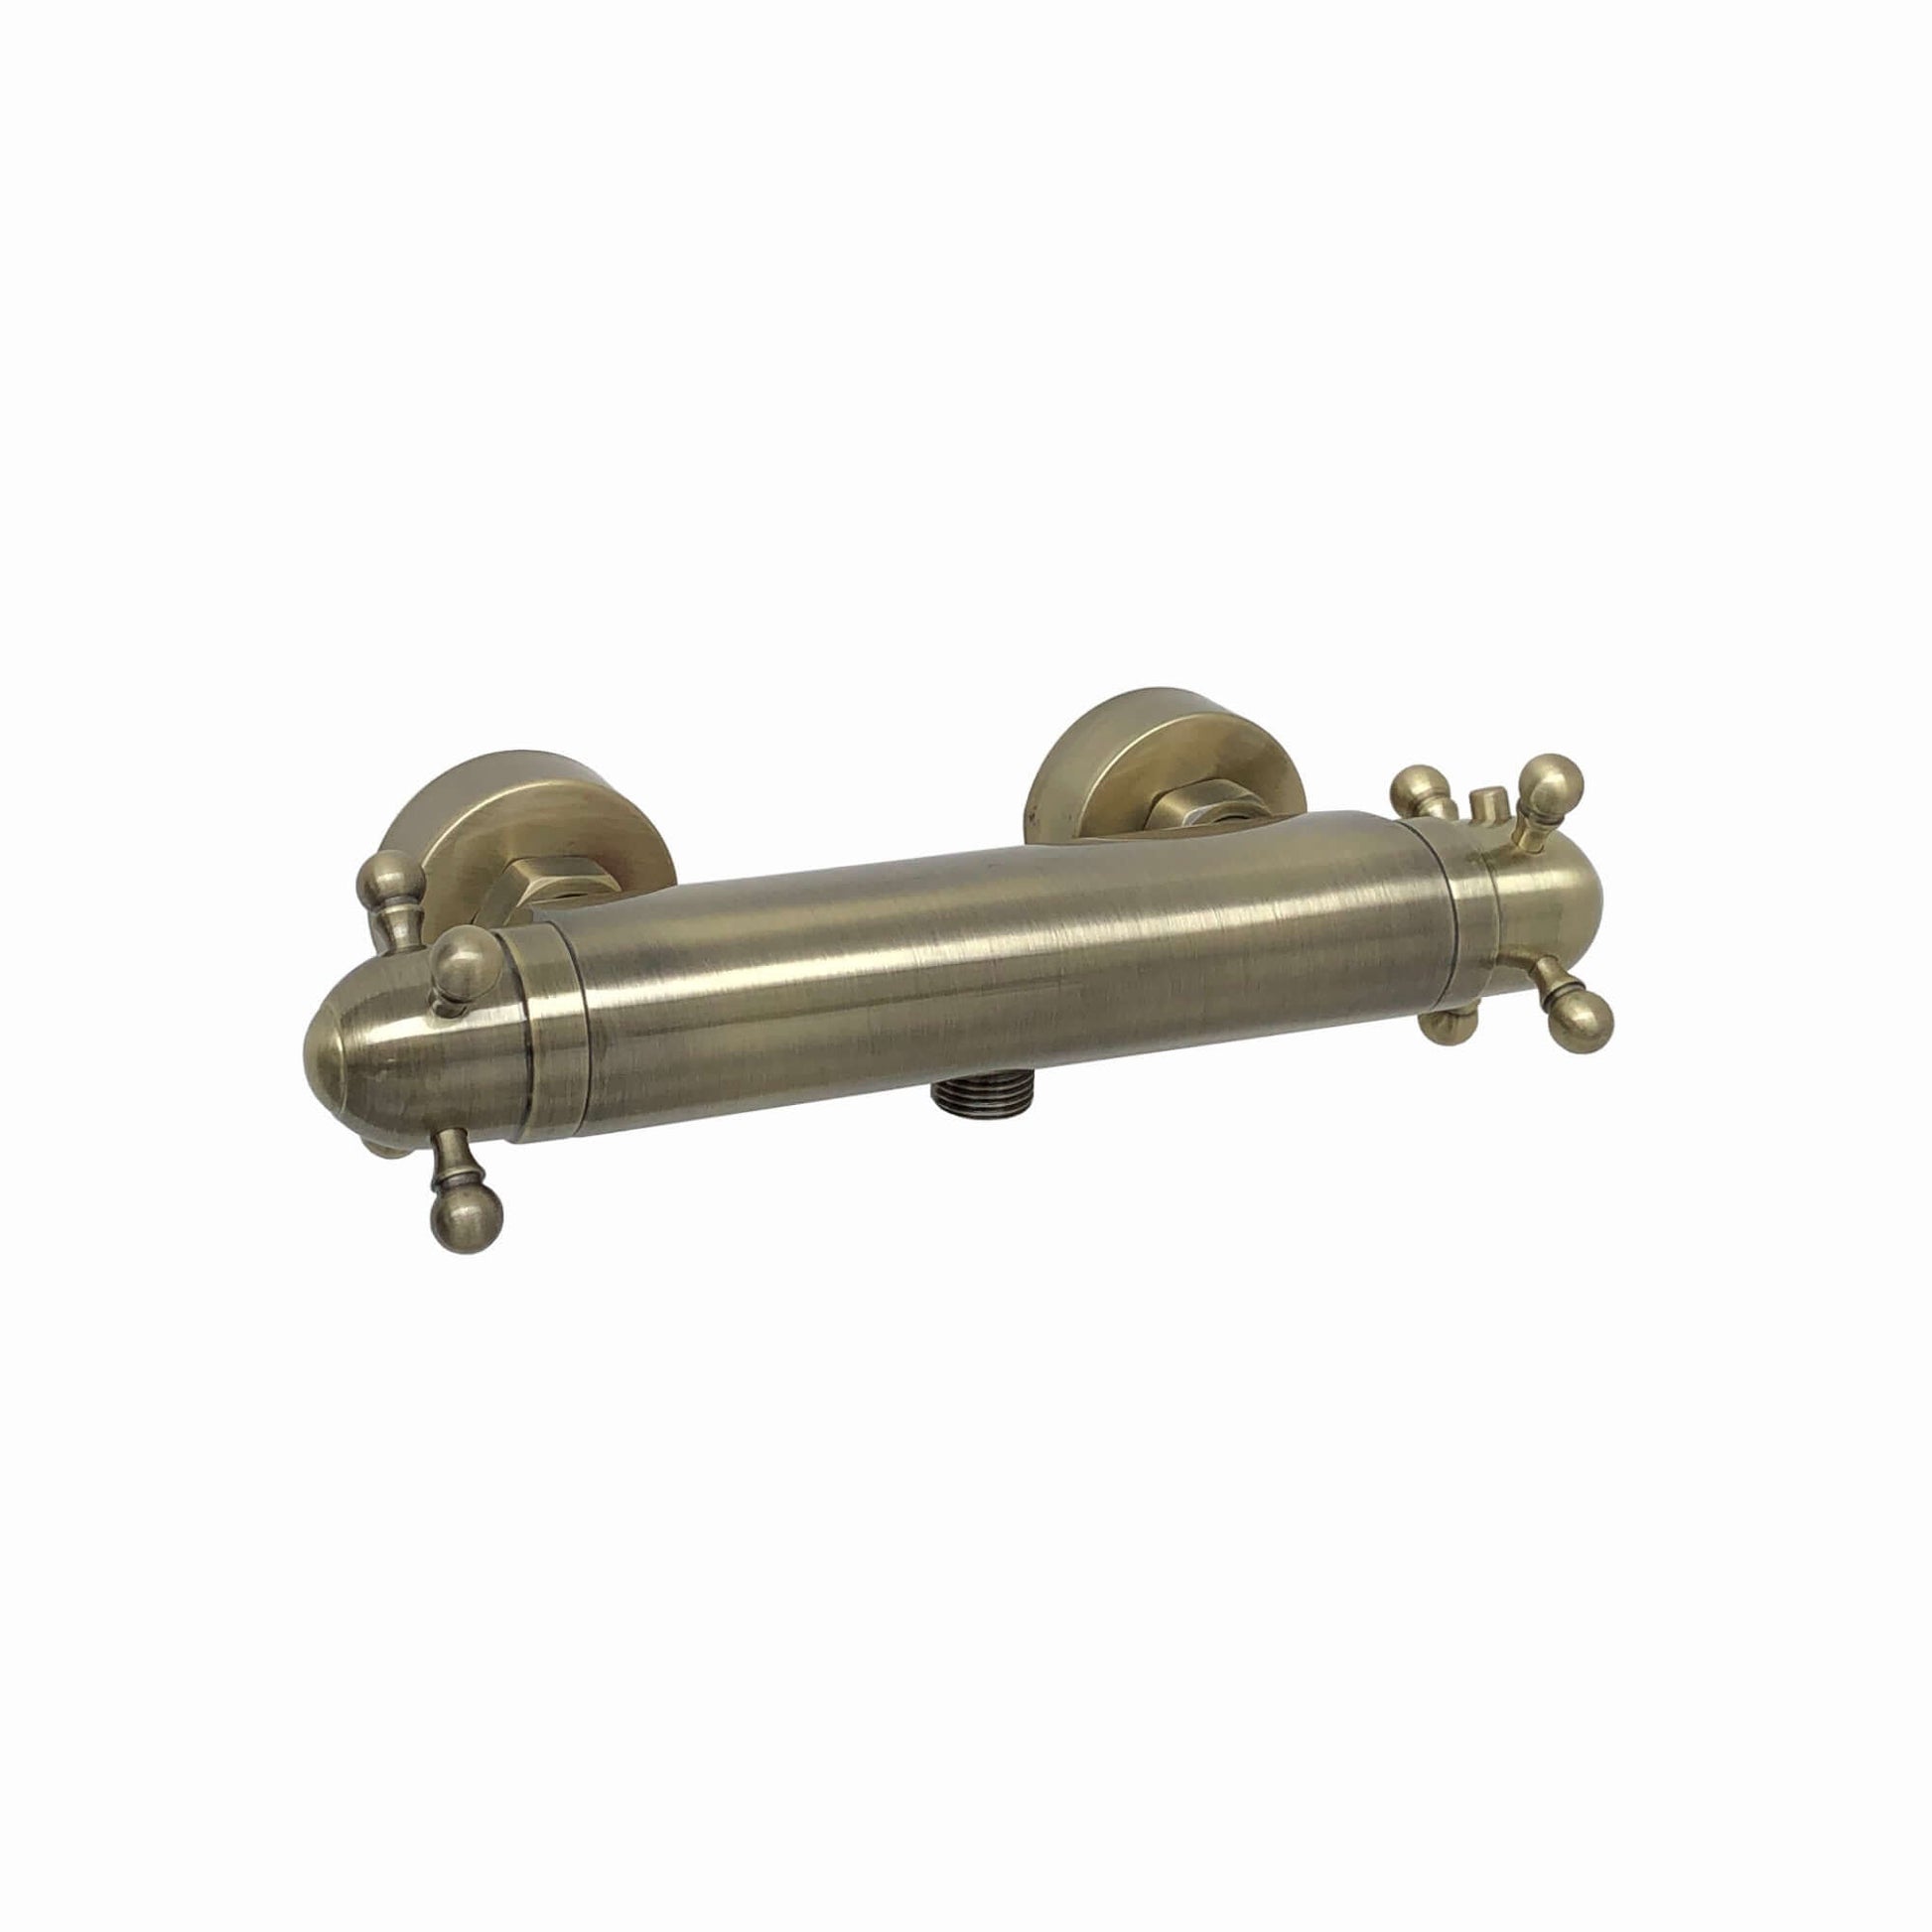 T39-01-gallant-traditional-thermostatic-shower-bar-mixer-valve-1-2-outlet-antique-bronze